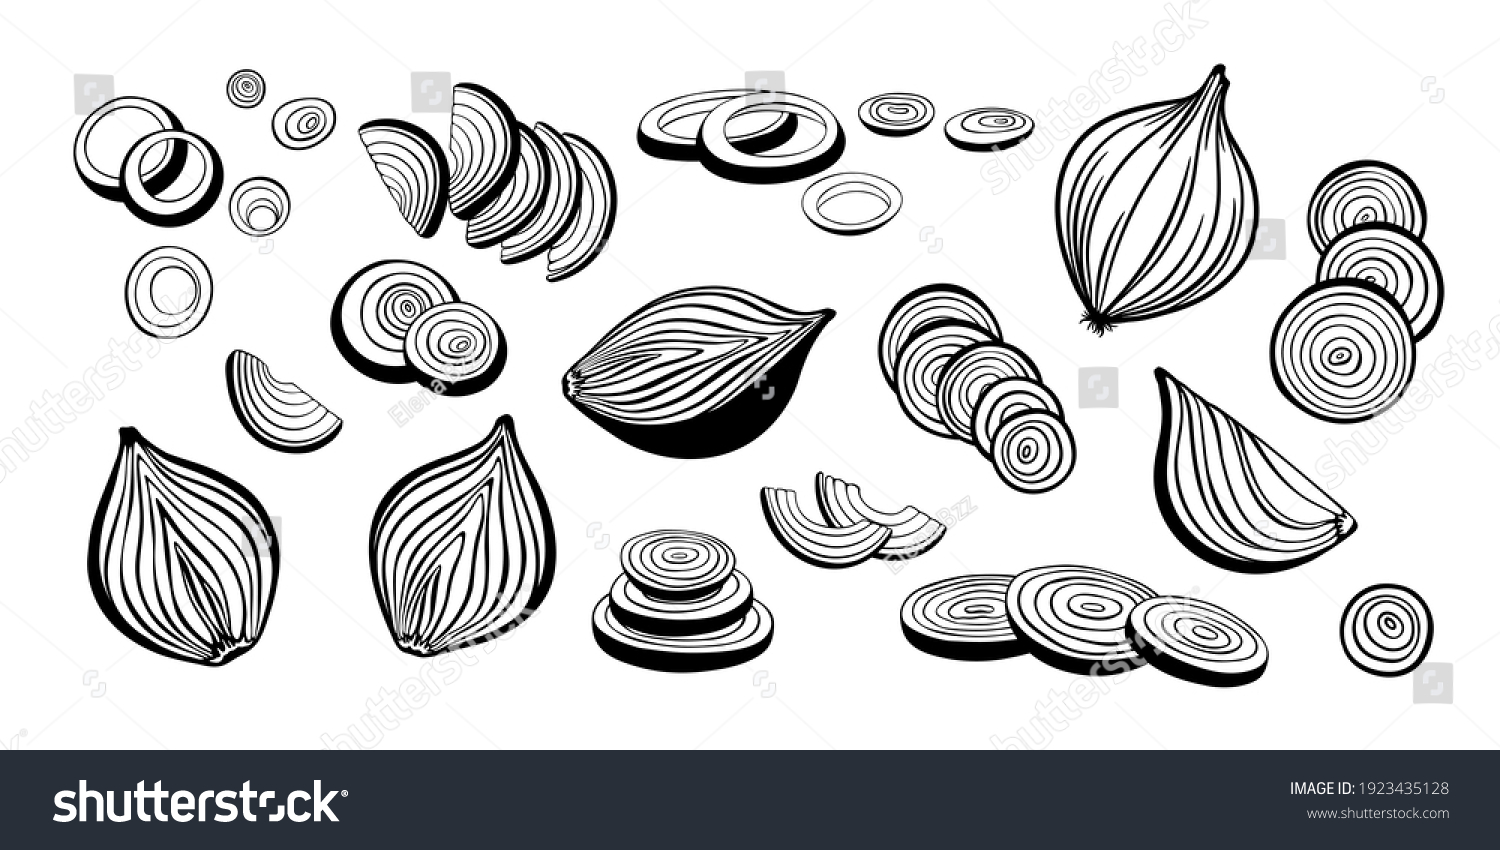 Big vector set of onion collection. Onion slices, rings and cut in half onion bulb. Sketch and monochrome outline drawing. #1923435128